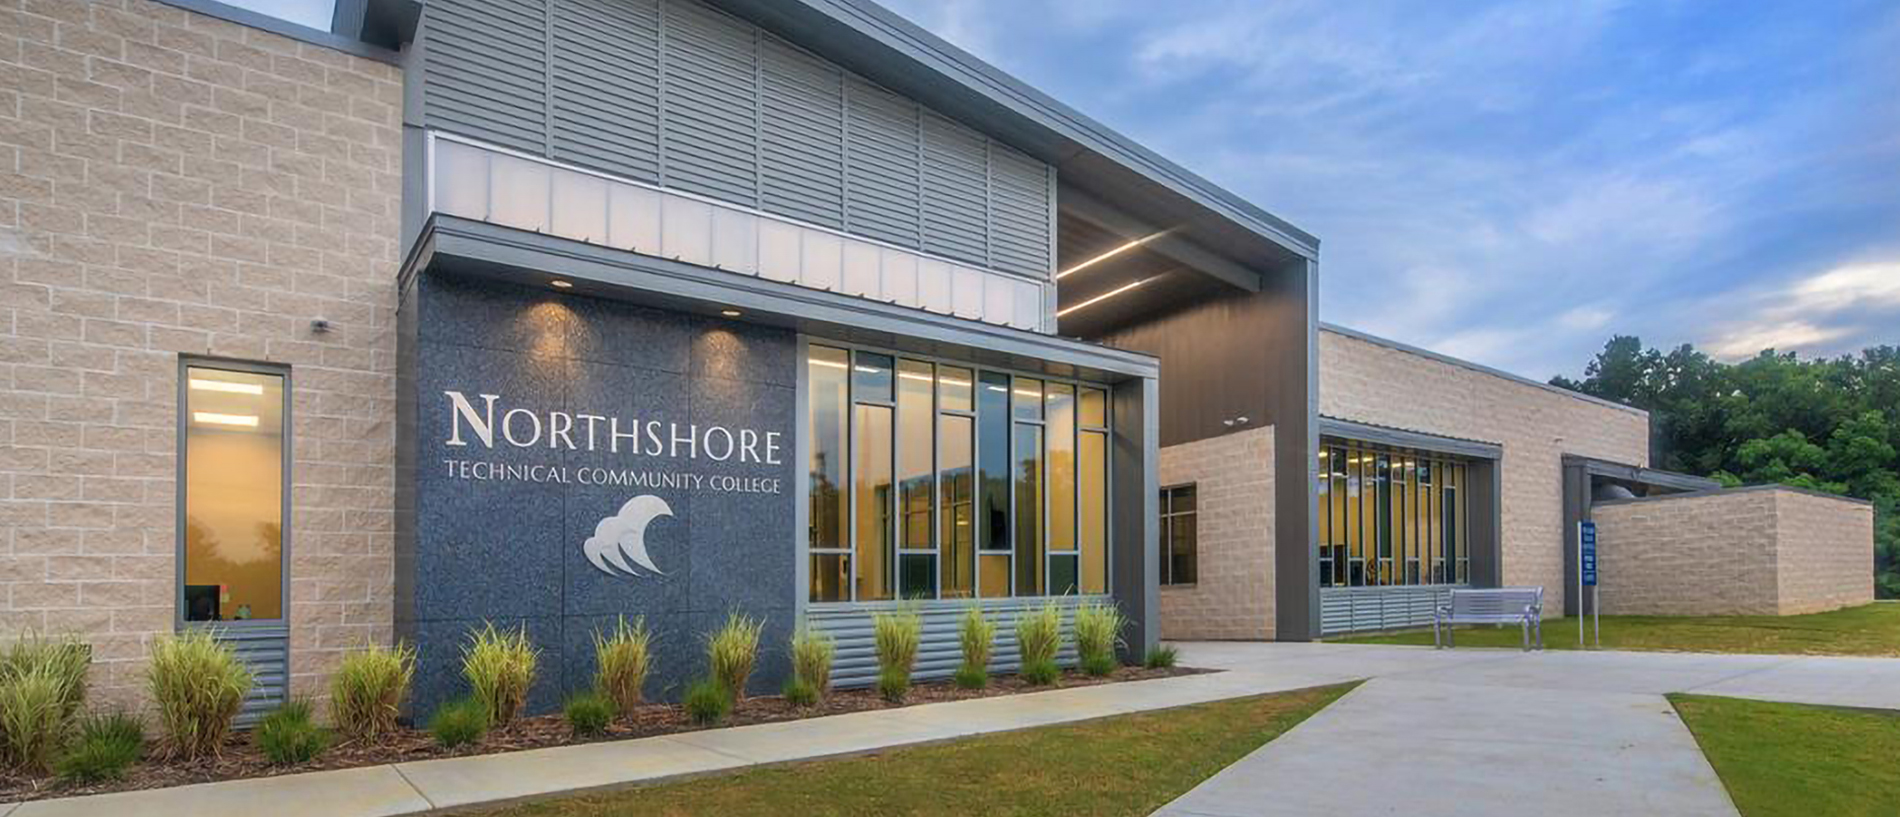 Welcome to Northshore Technical Community College | Northshore ...